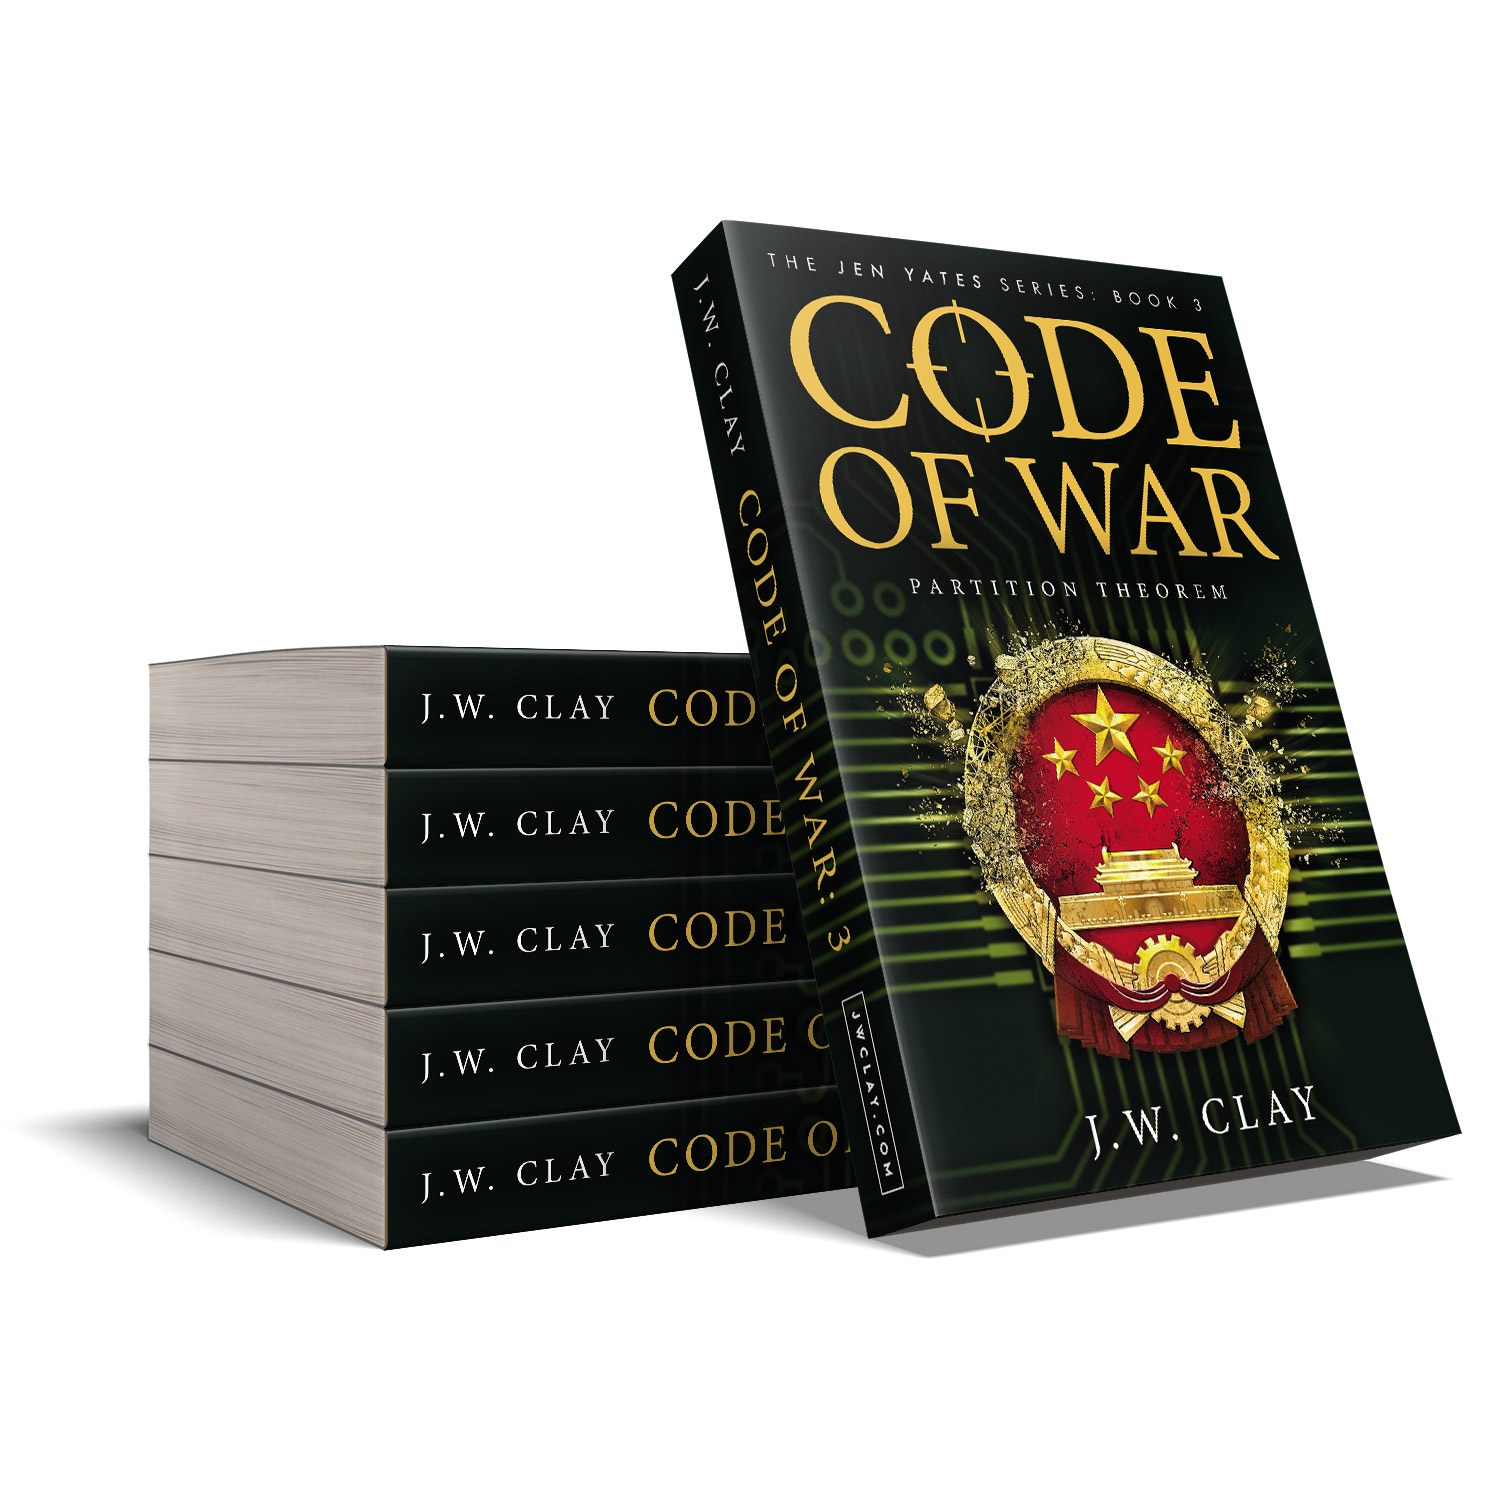 'Code of War' is a a thrilling cyber combat series. The author is JW Clay. The cover design & interior design of the series is by Mark Thomas. To learn more about what Mark could do for your book, please visit coverness.com